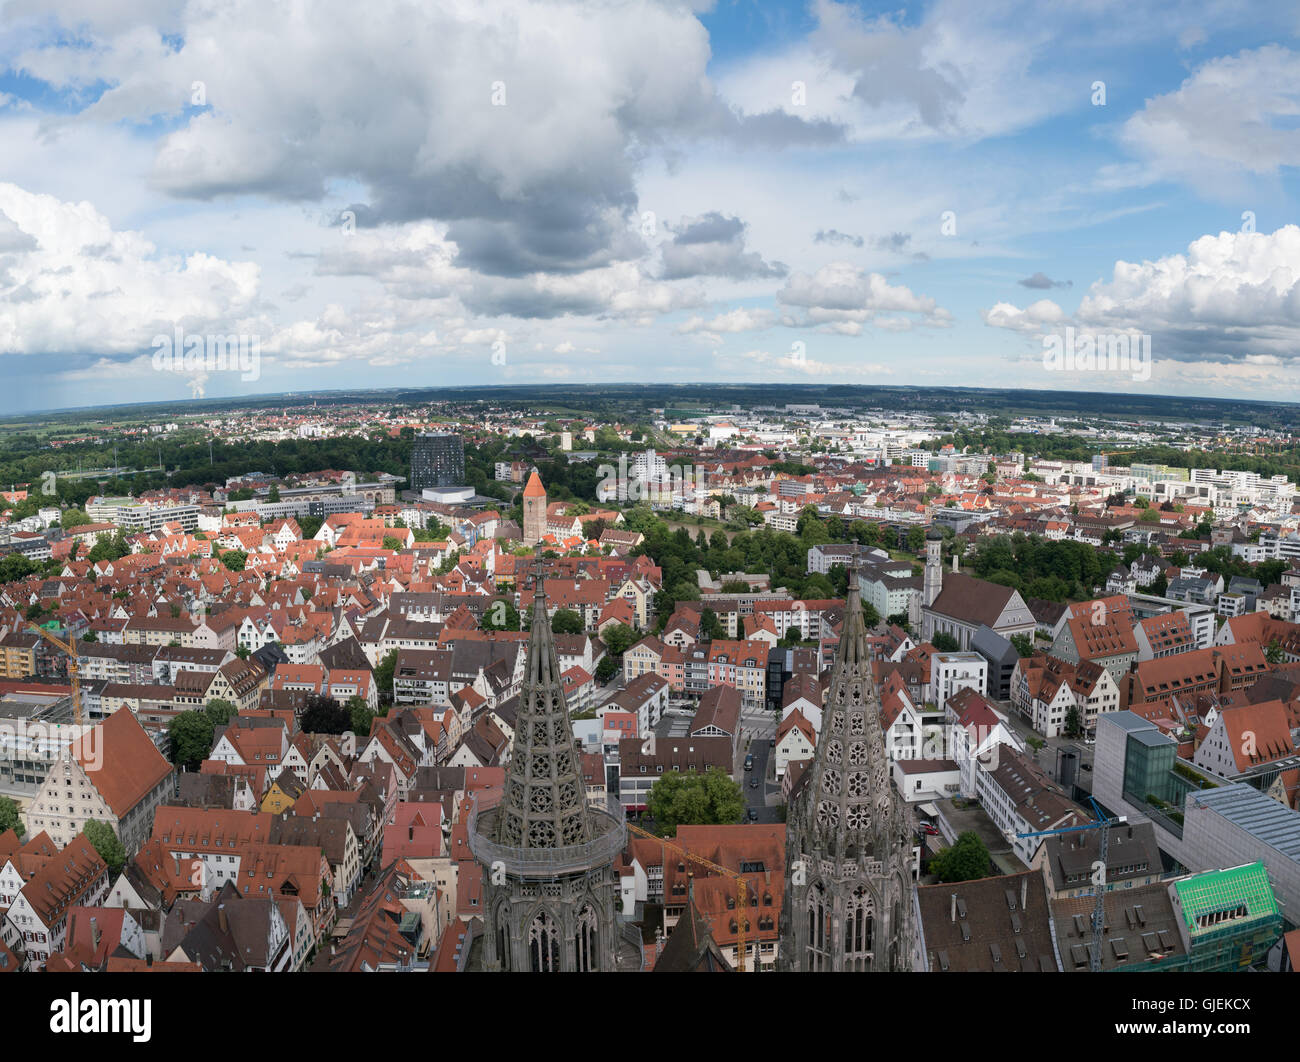 ULM, GERMANY - JUNE 18, 2016: Ulm and Danube river bird view, Germany. Ulm is primarily known for having the tallest church in t Stock Photo